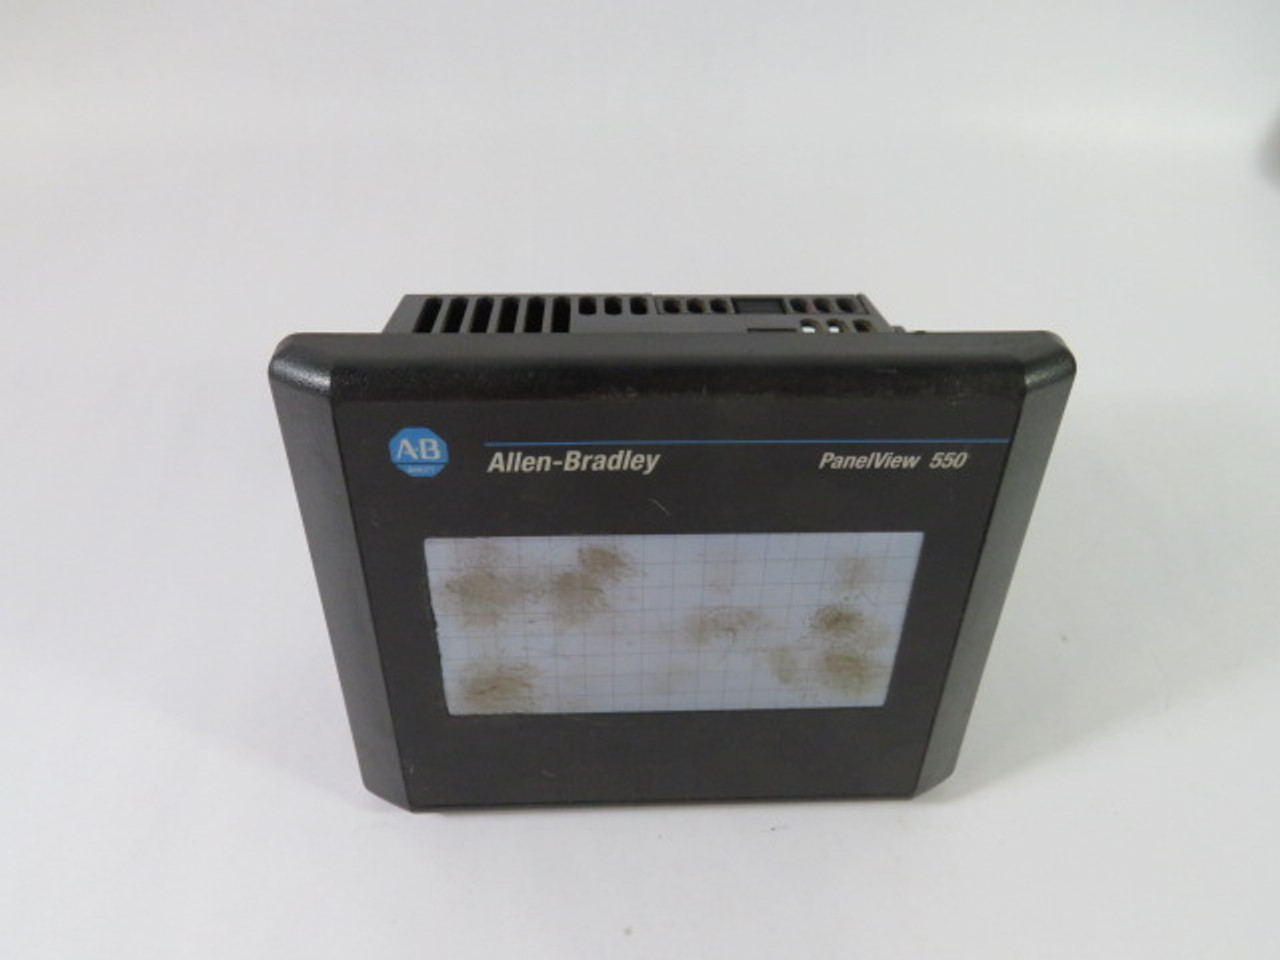 Allen-Bradley 2711-T5A20L1 Panelview550 Operator Interface 24VDC USED